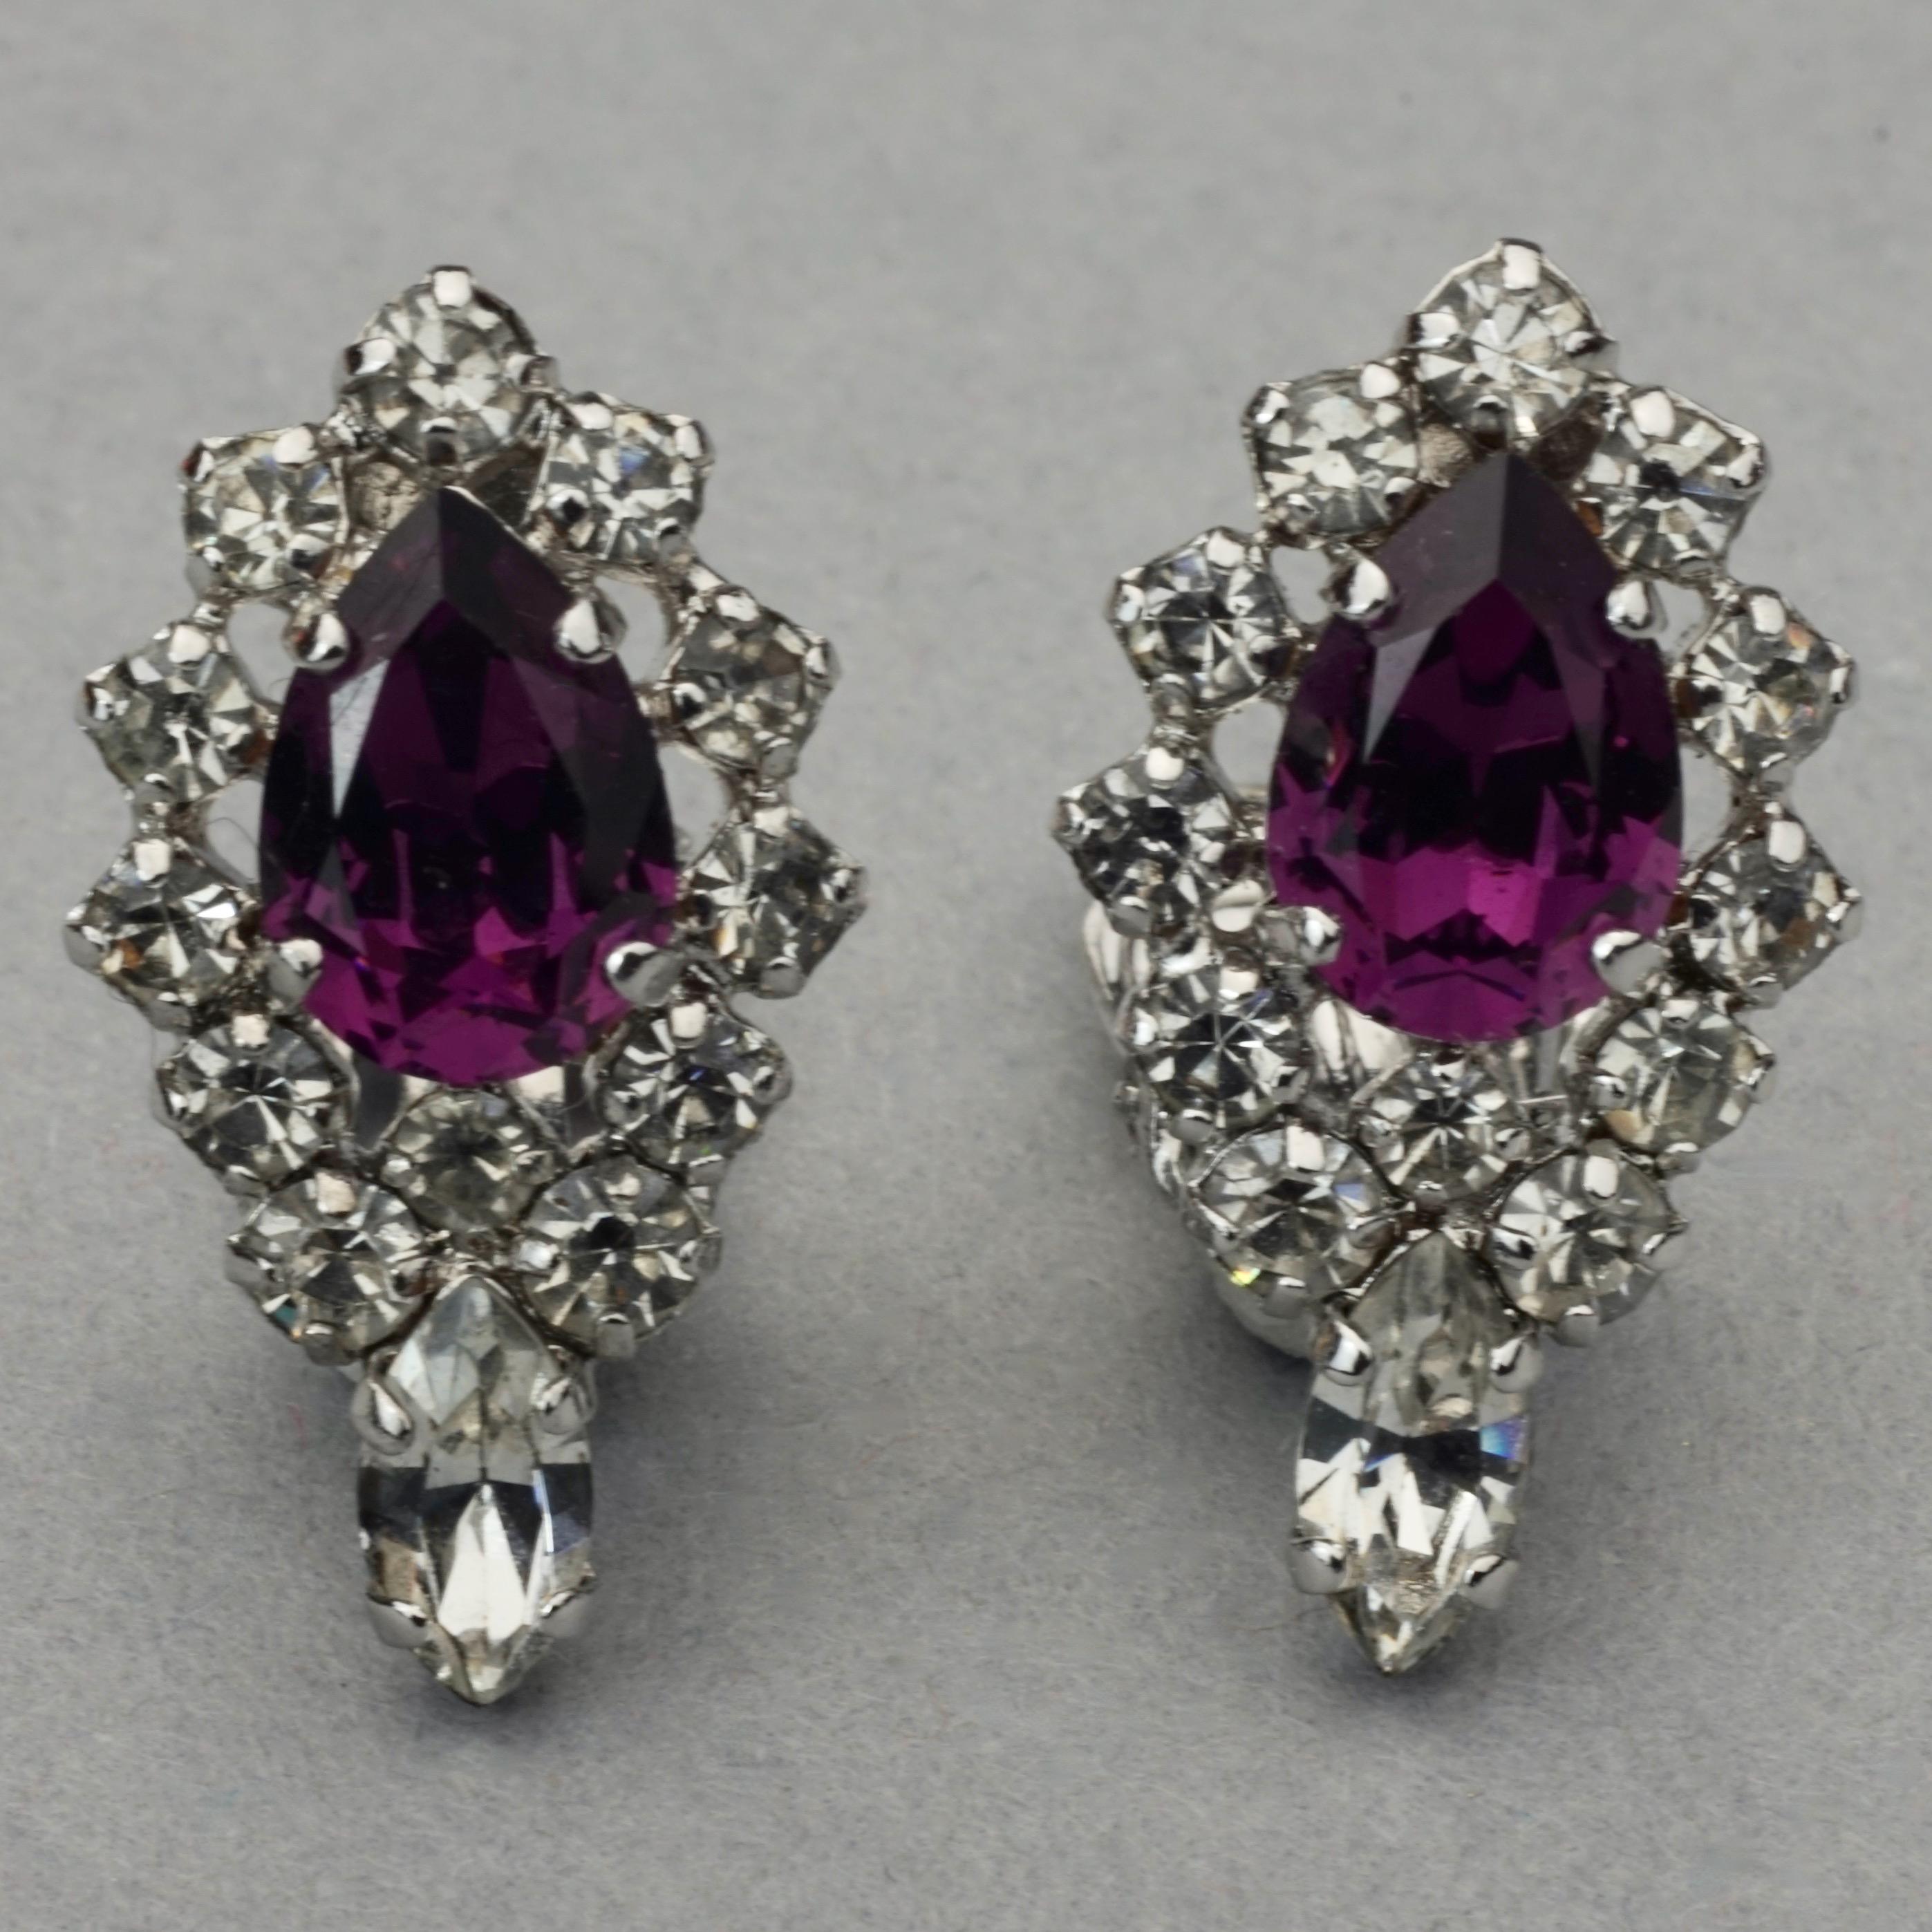 Vintage CHRISTIAN DIOR Purple Amethyst Rhinestone Earrings In Excellent Condition For Sale In Kingersheim, Alsace